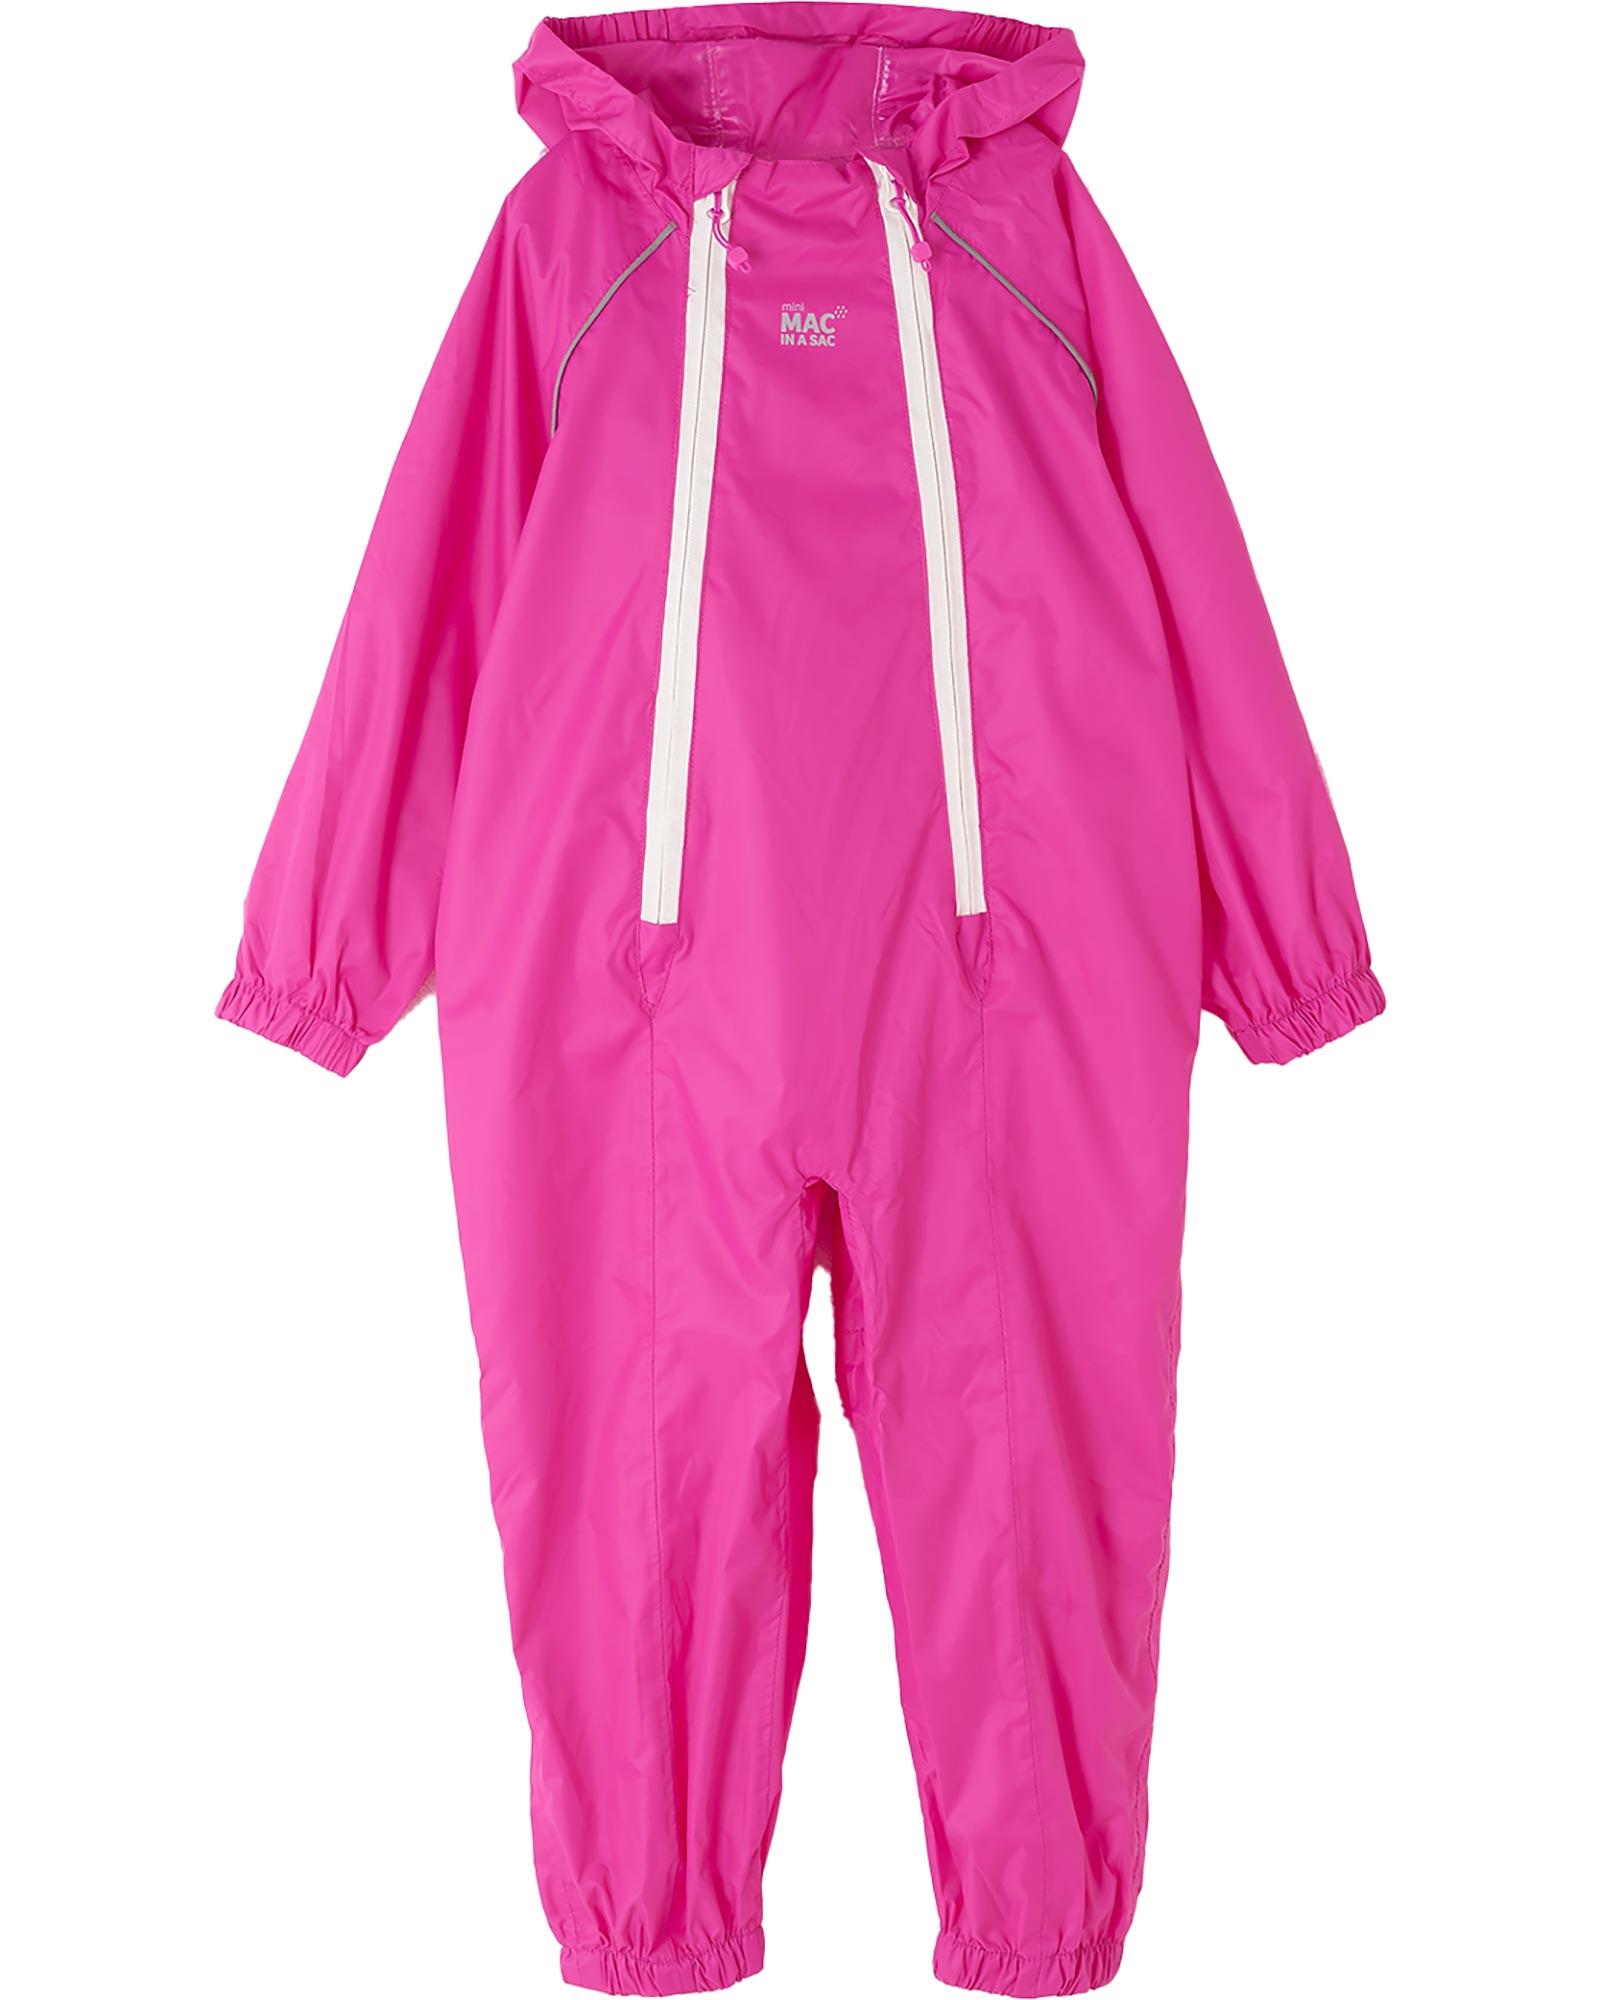 Target Dry Mac in a Sac Puddlesuit - Pink 1-2 Years